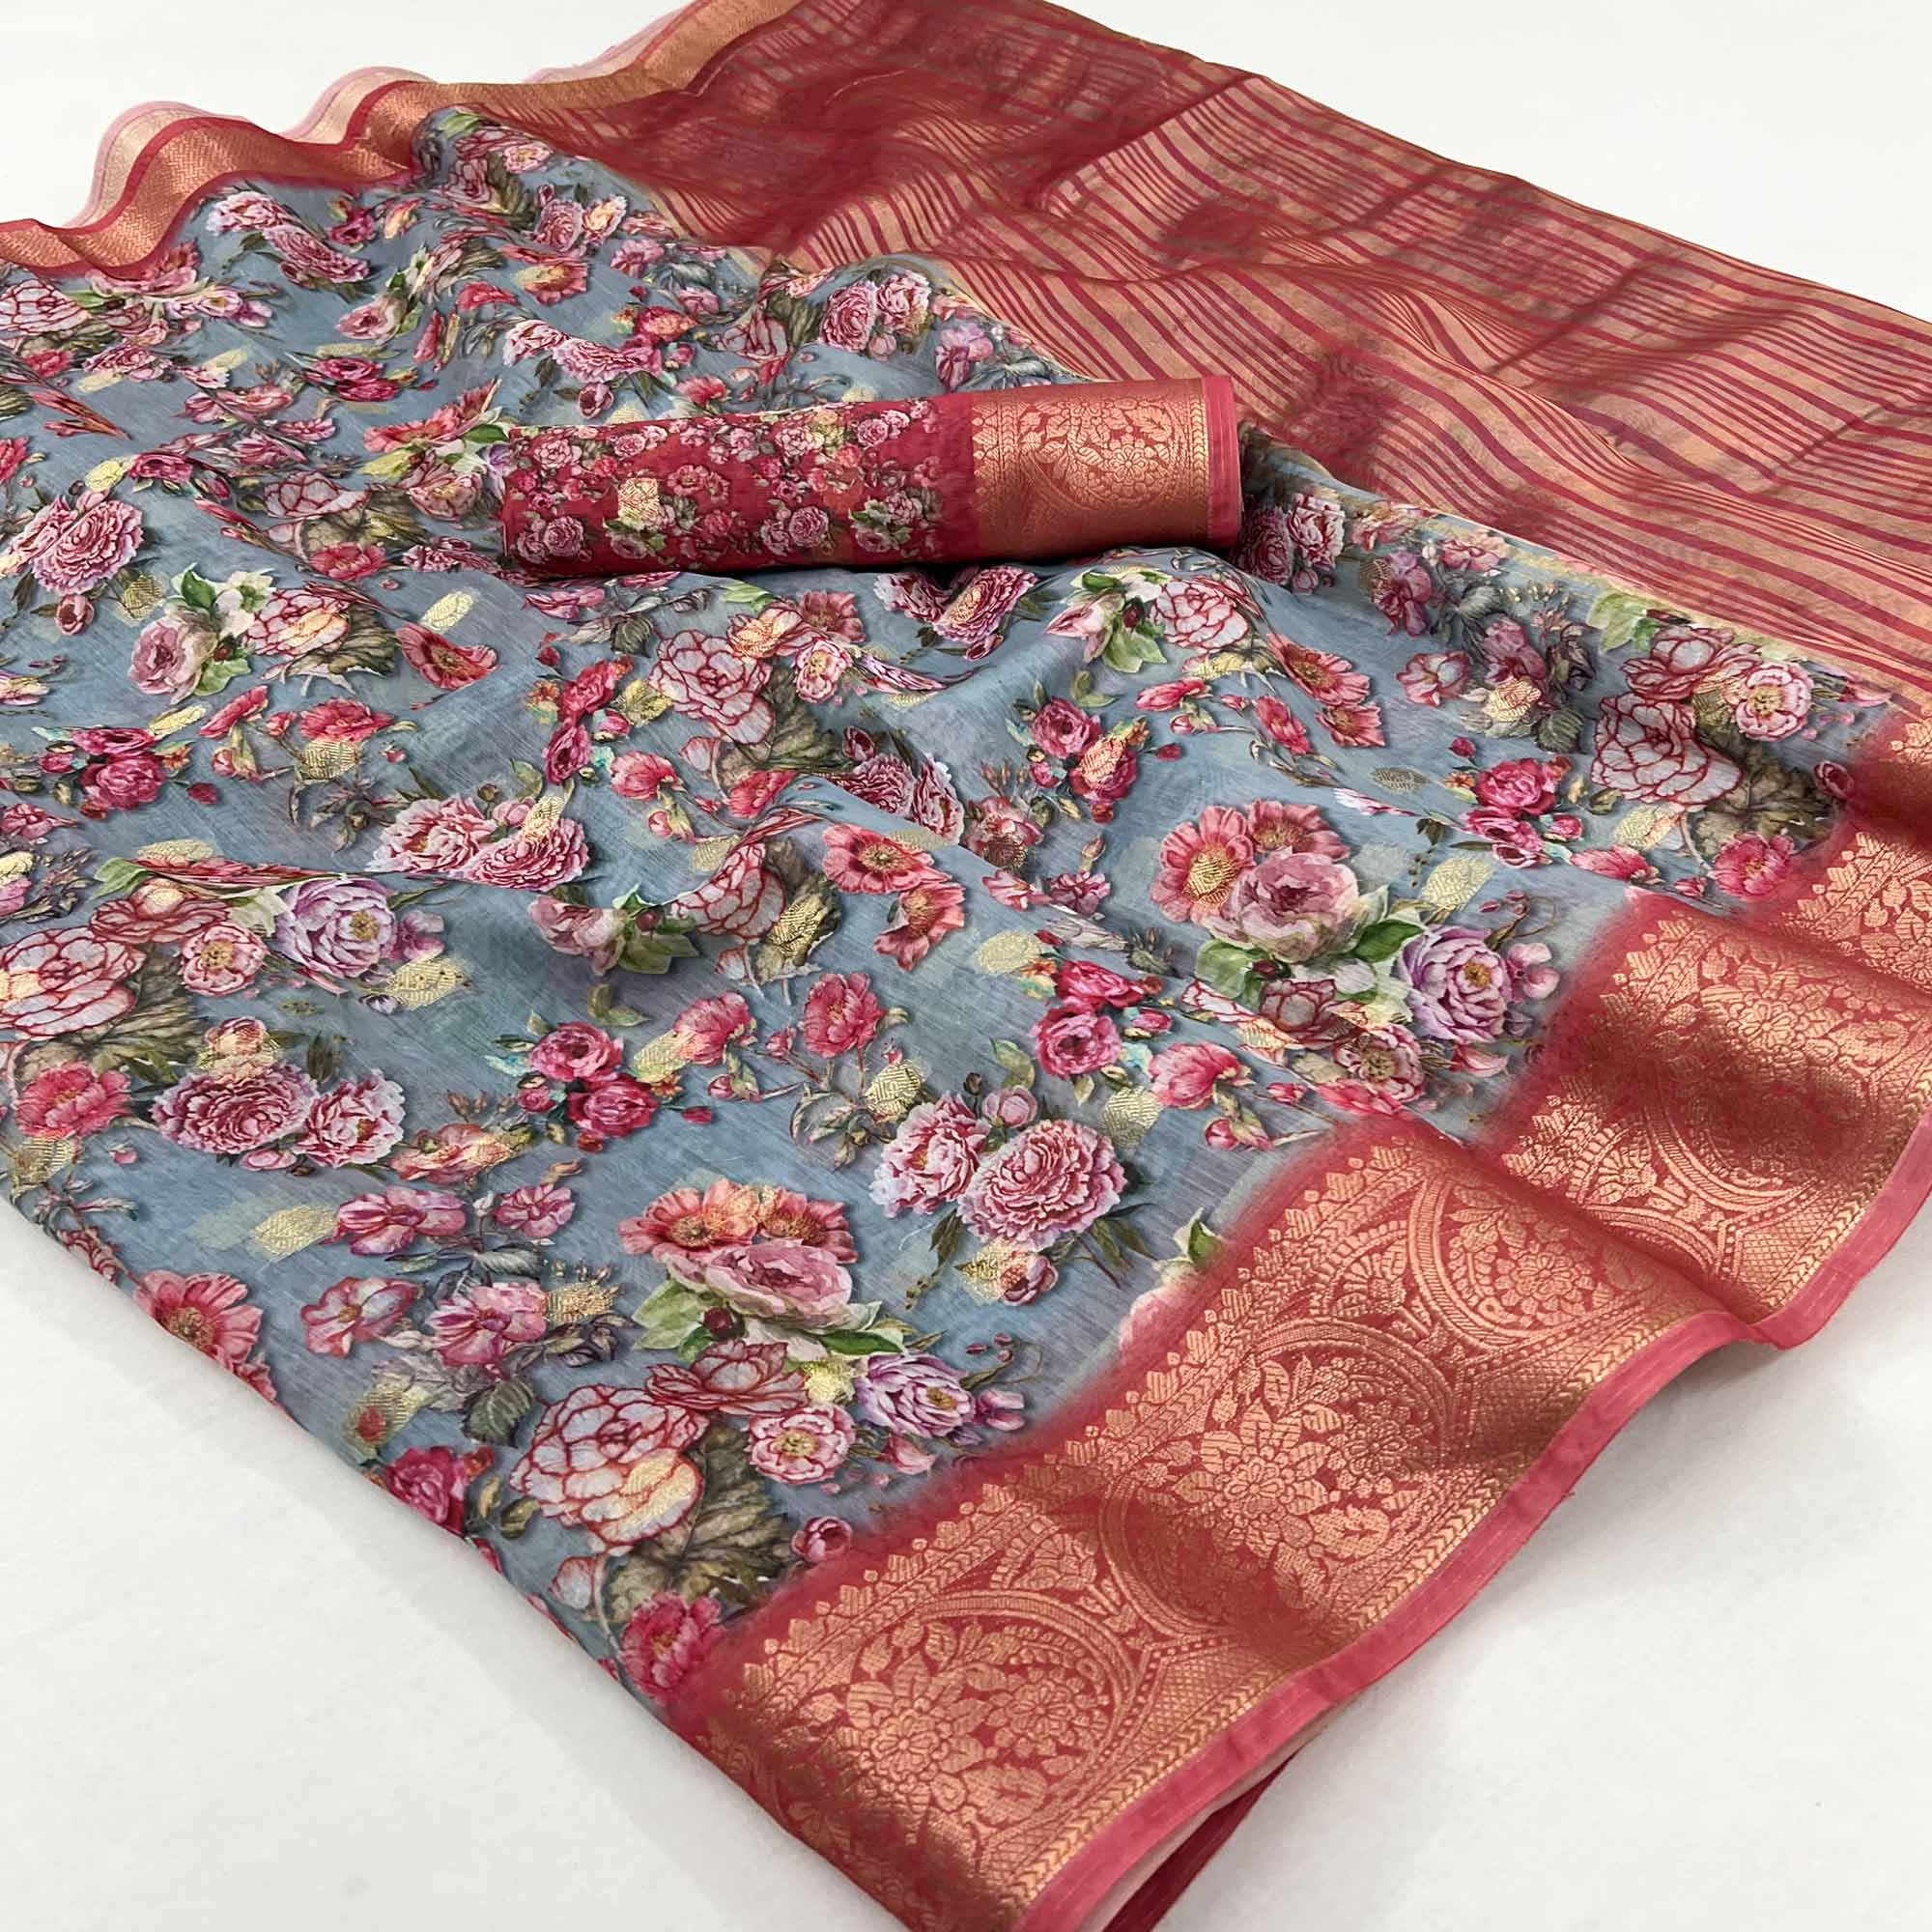 Slate Grey Floral Digital Printed With Woven Border Cotton Silk Saree